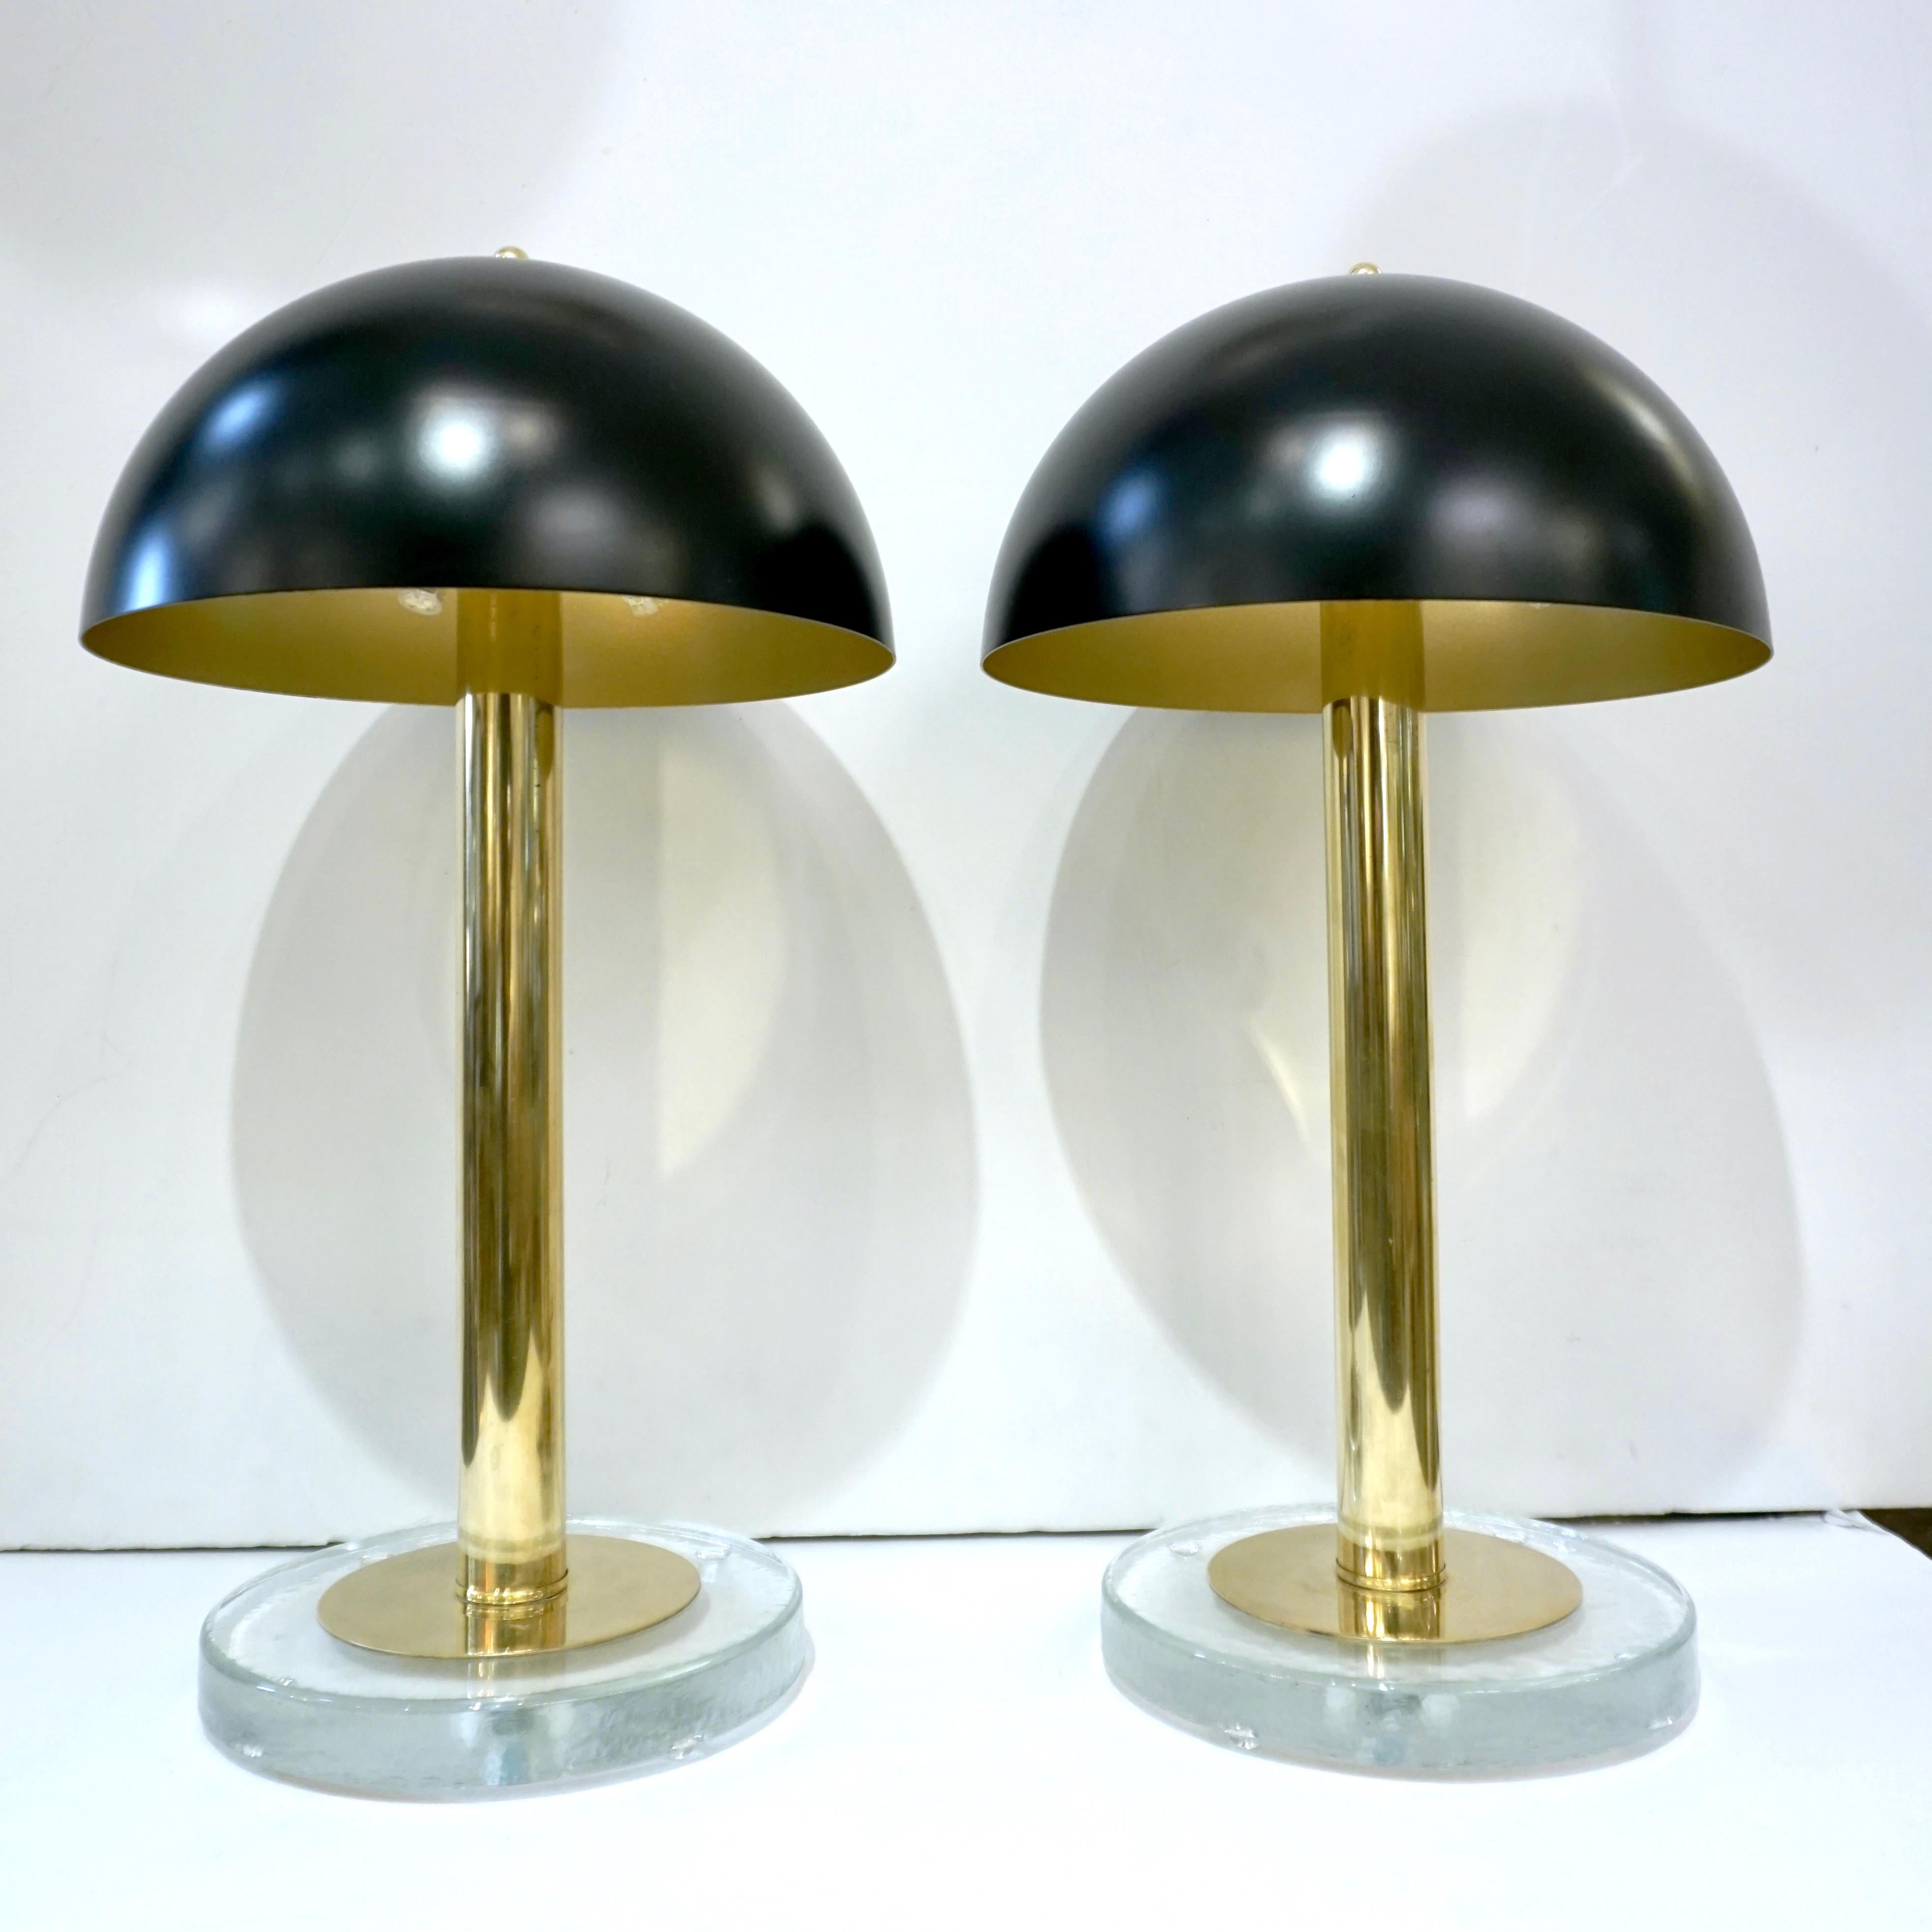 Minimalist elegant design! for this pair of lamps, entirely handcrafted in Italy, with hovering brass dome top shades, high quality of craftsmanship, and attention to detail: the outside of the cupola is lacquered in black and the inside is gold for